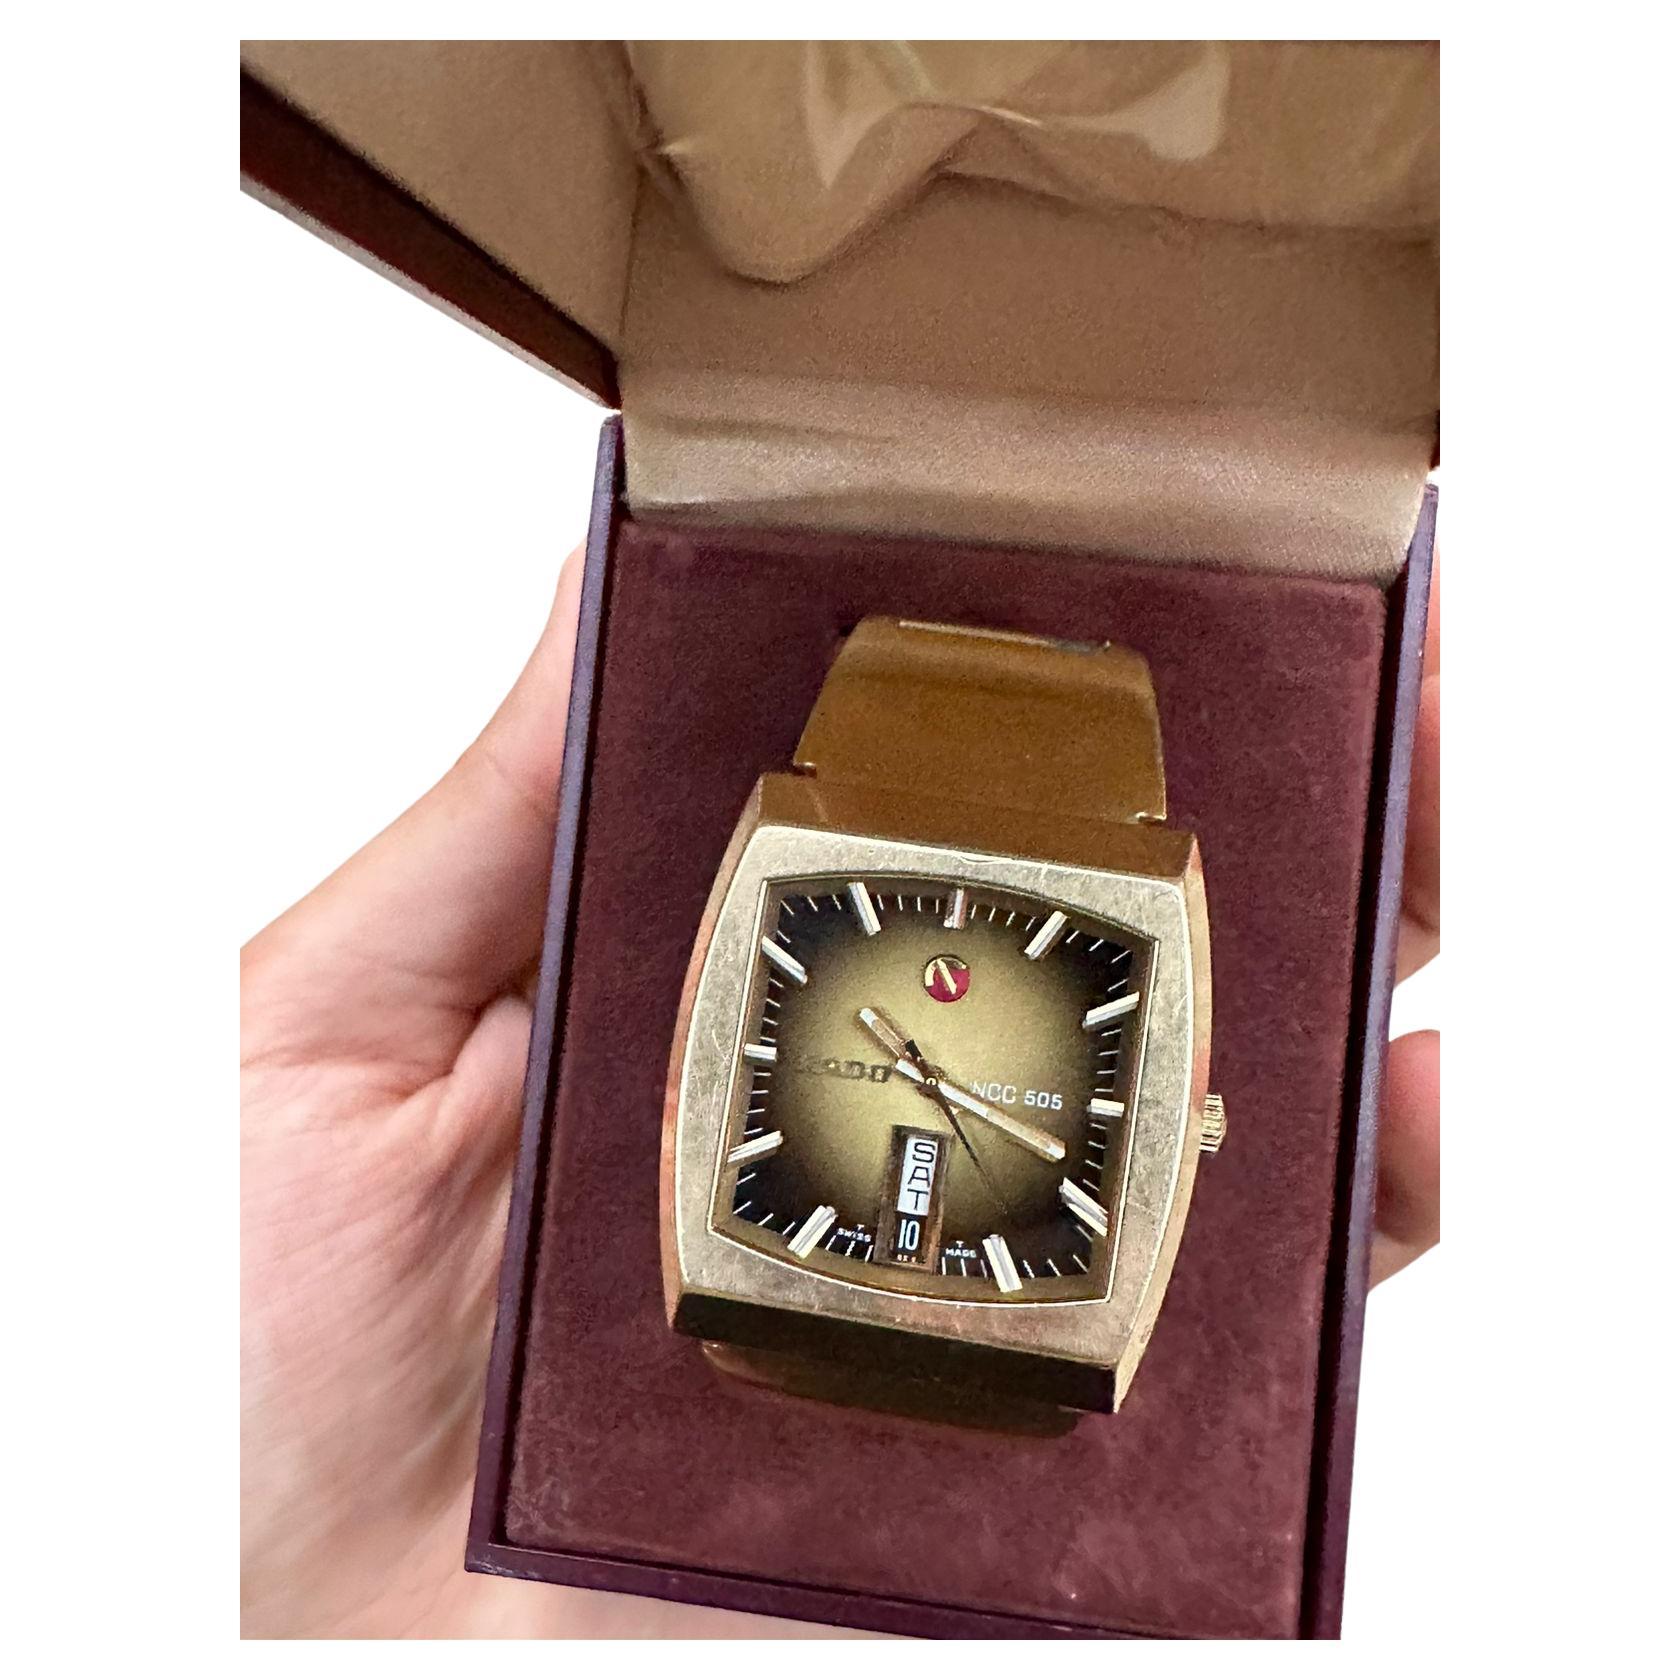 Rado Ncc 505 Automatic Gold Plated Rare Dial Boxed For Sale